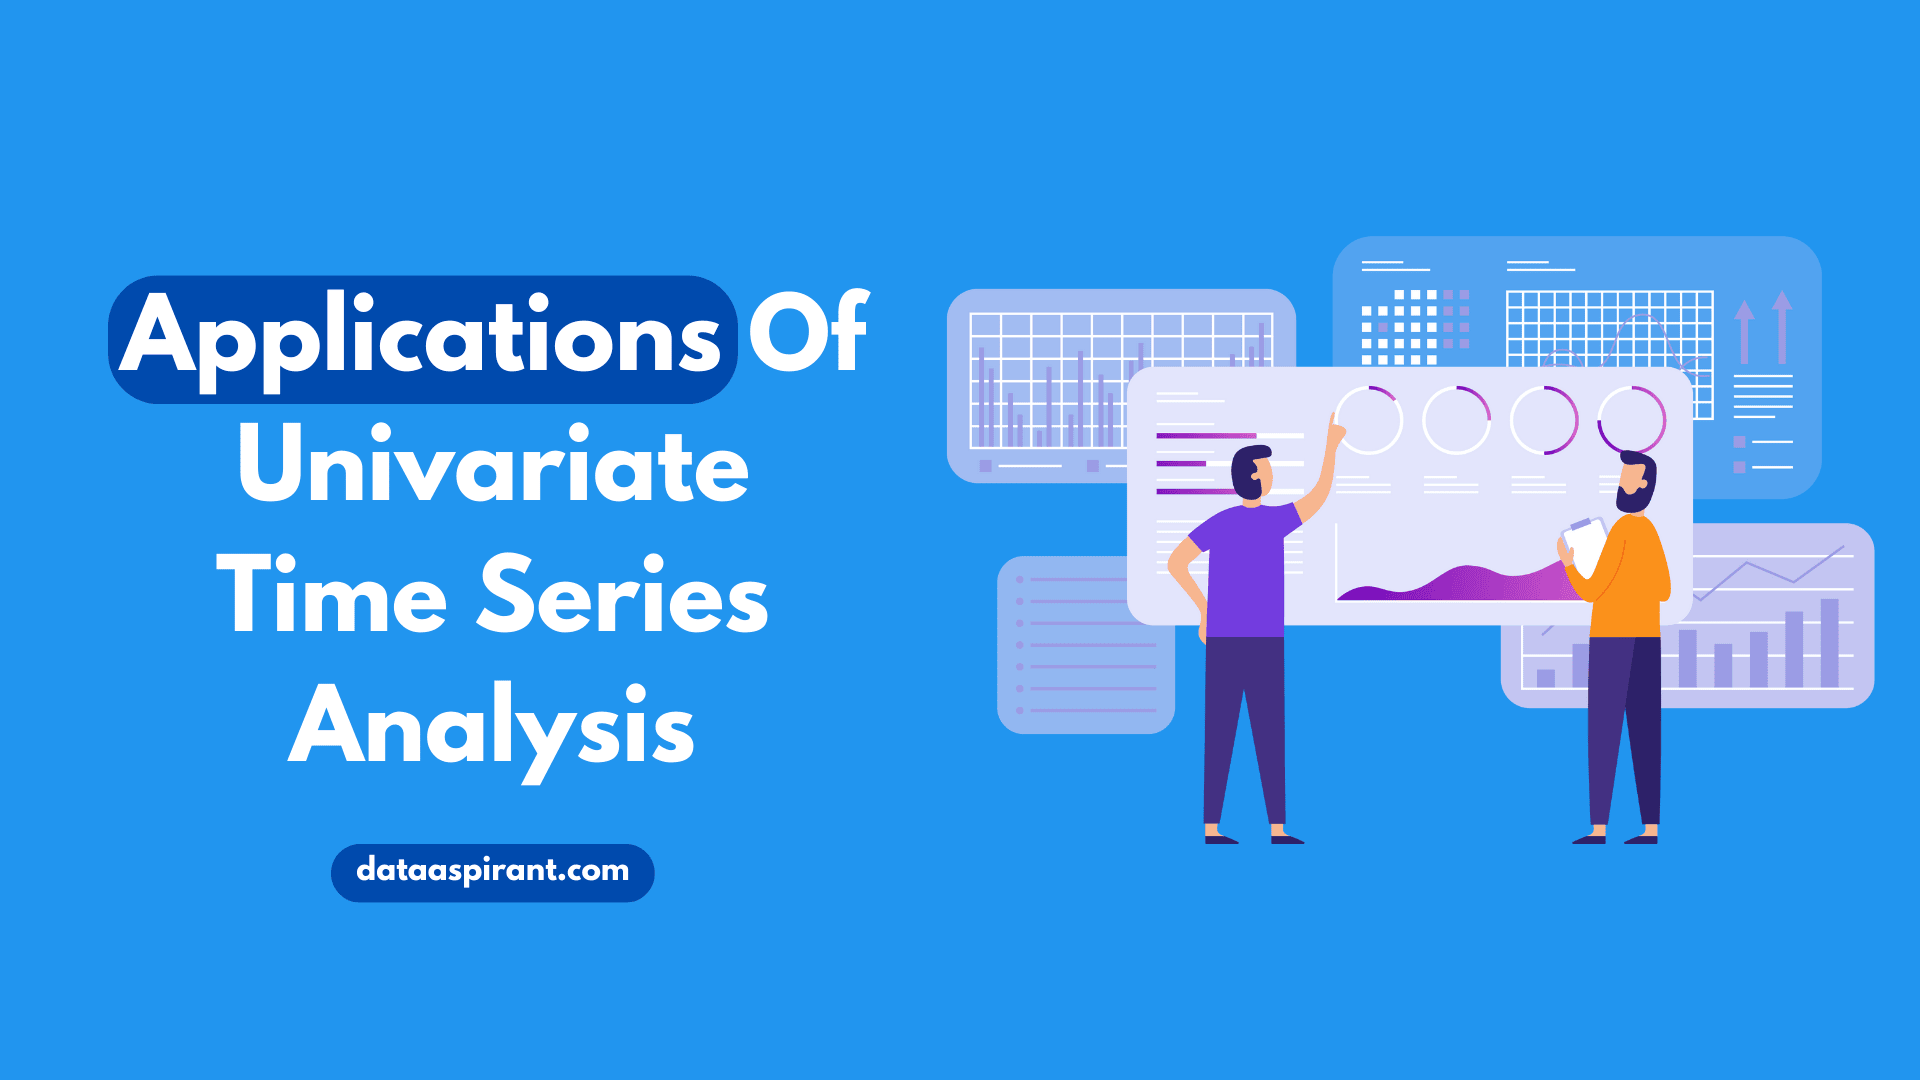 Applications of Univariate Time Series Analysis